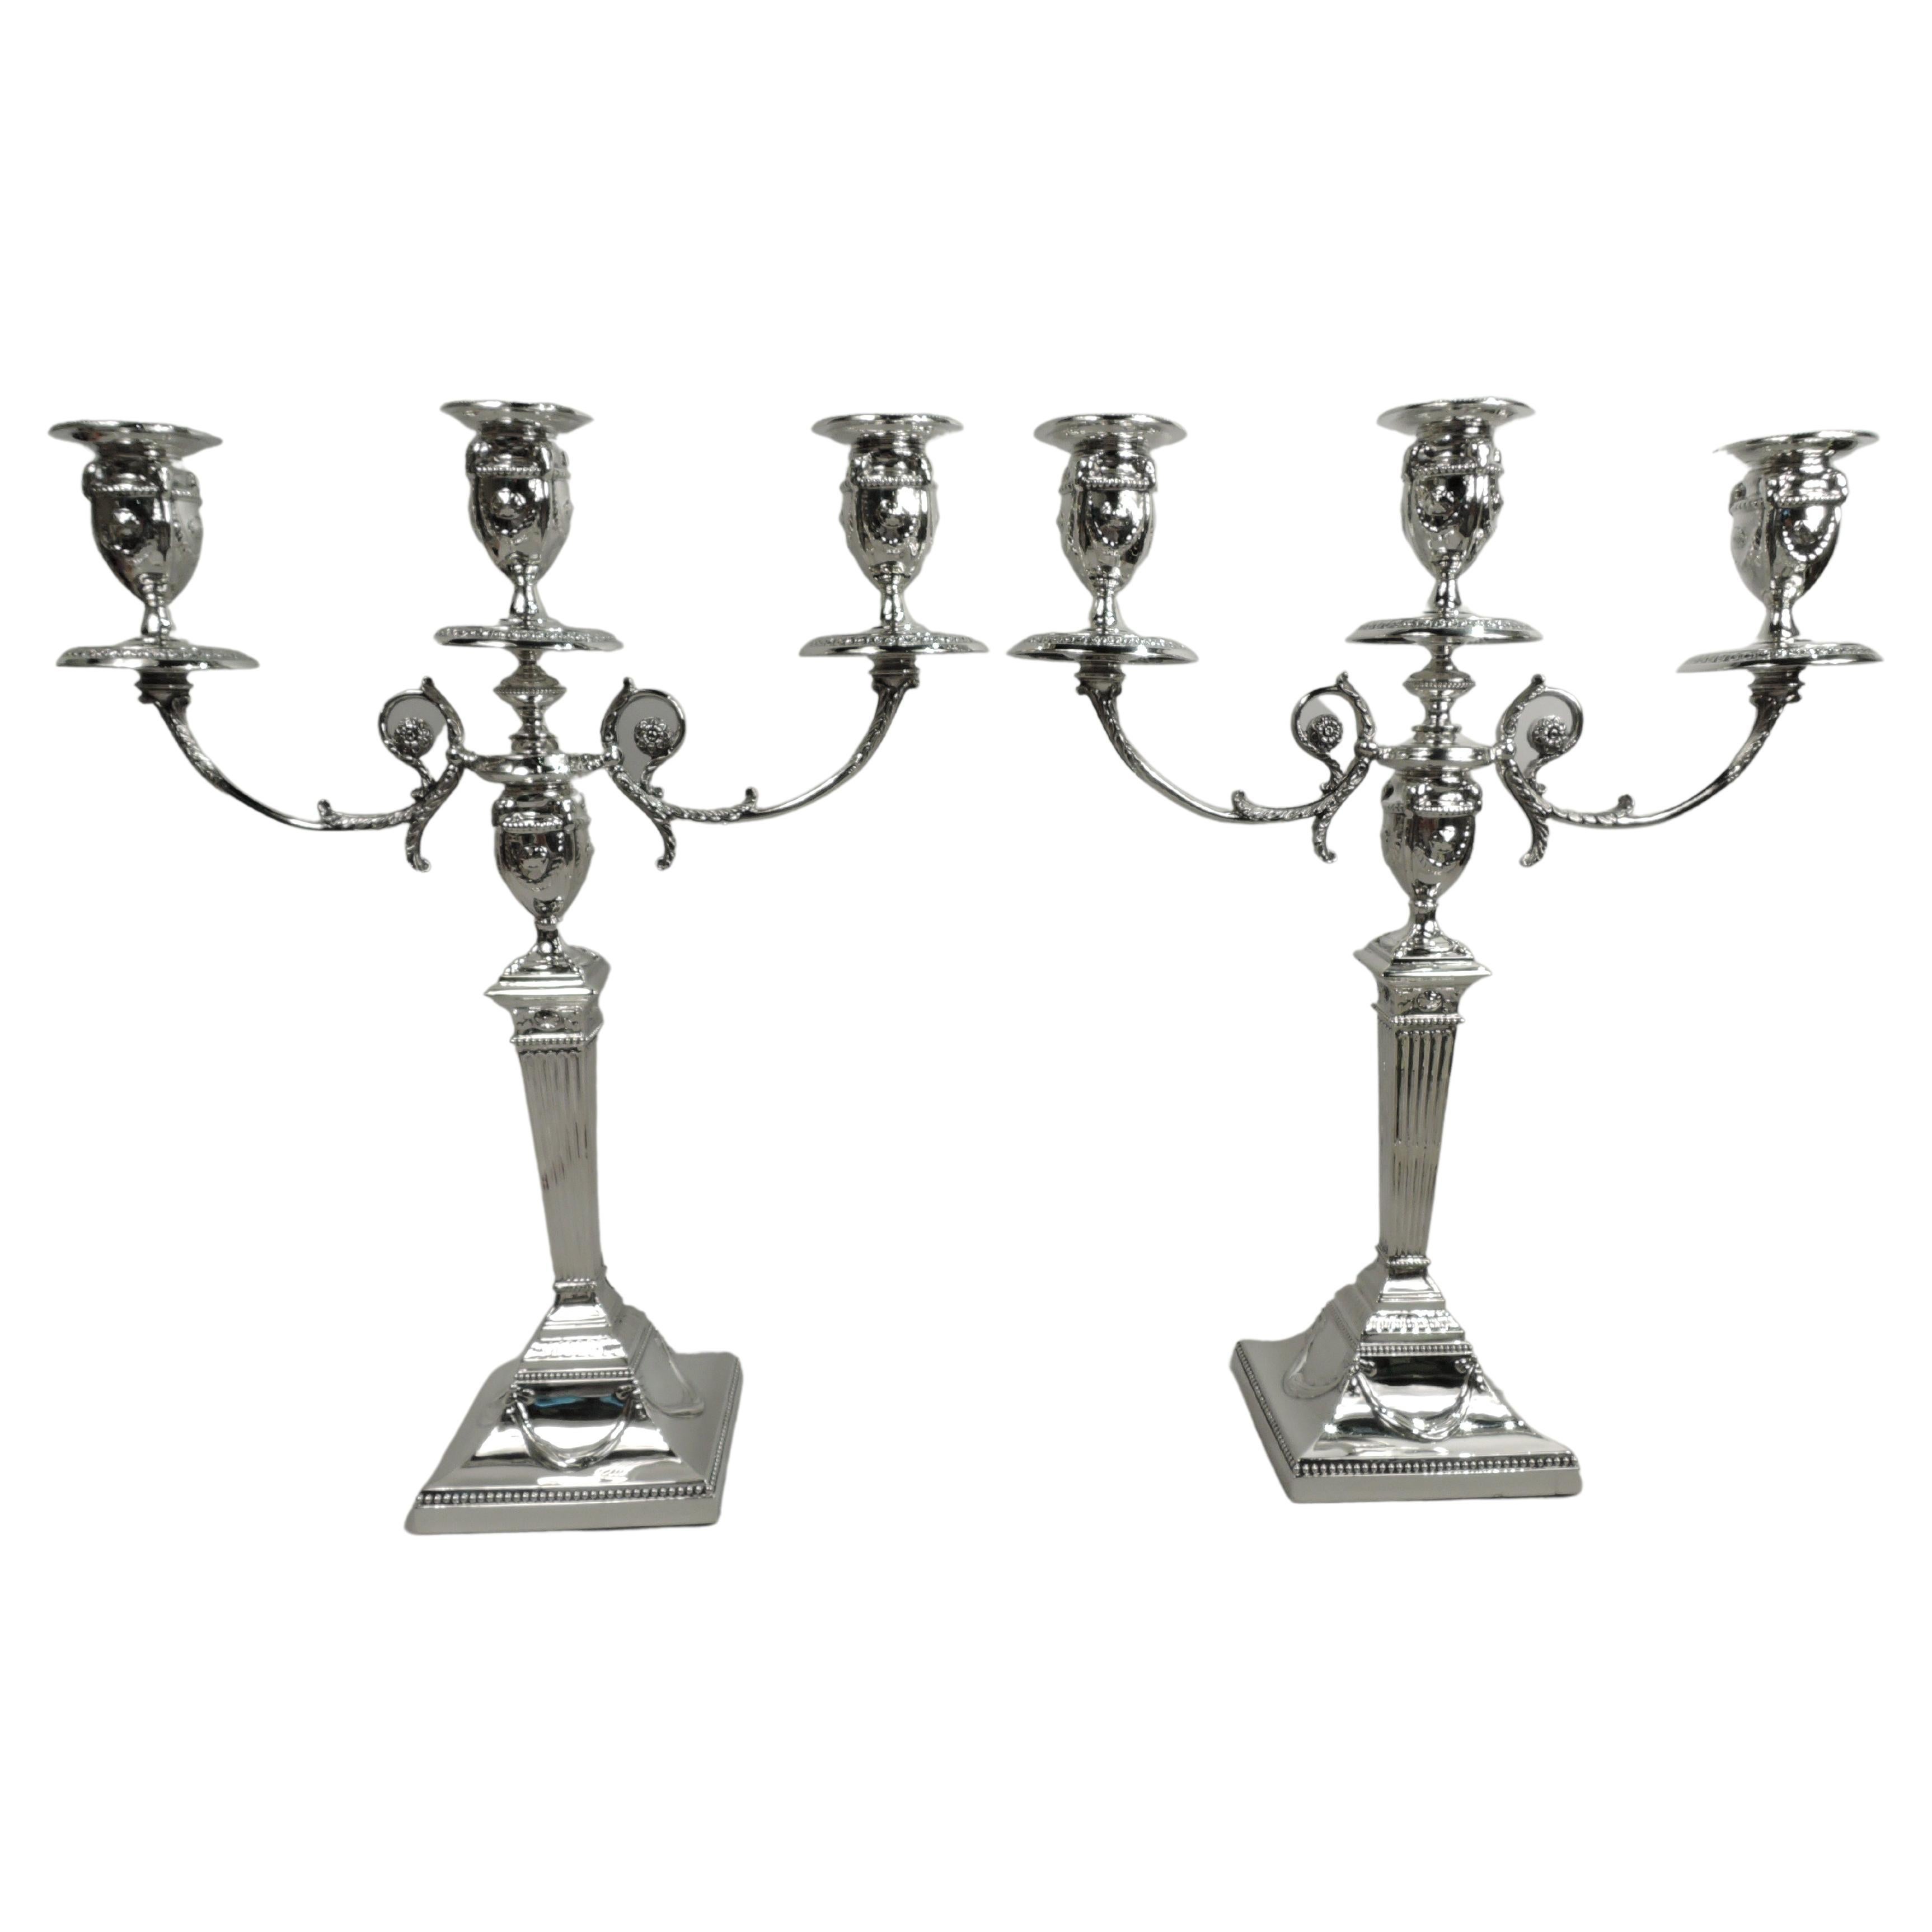 Pair of Antique English Victorian Neoclassical 3-Light Candelabra